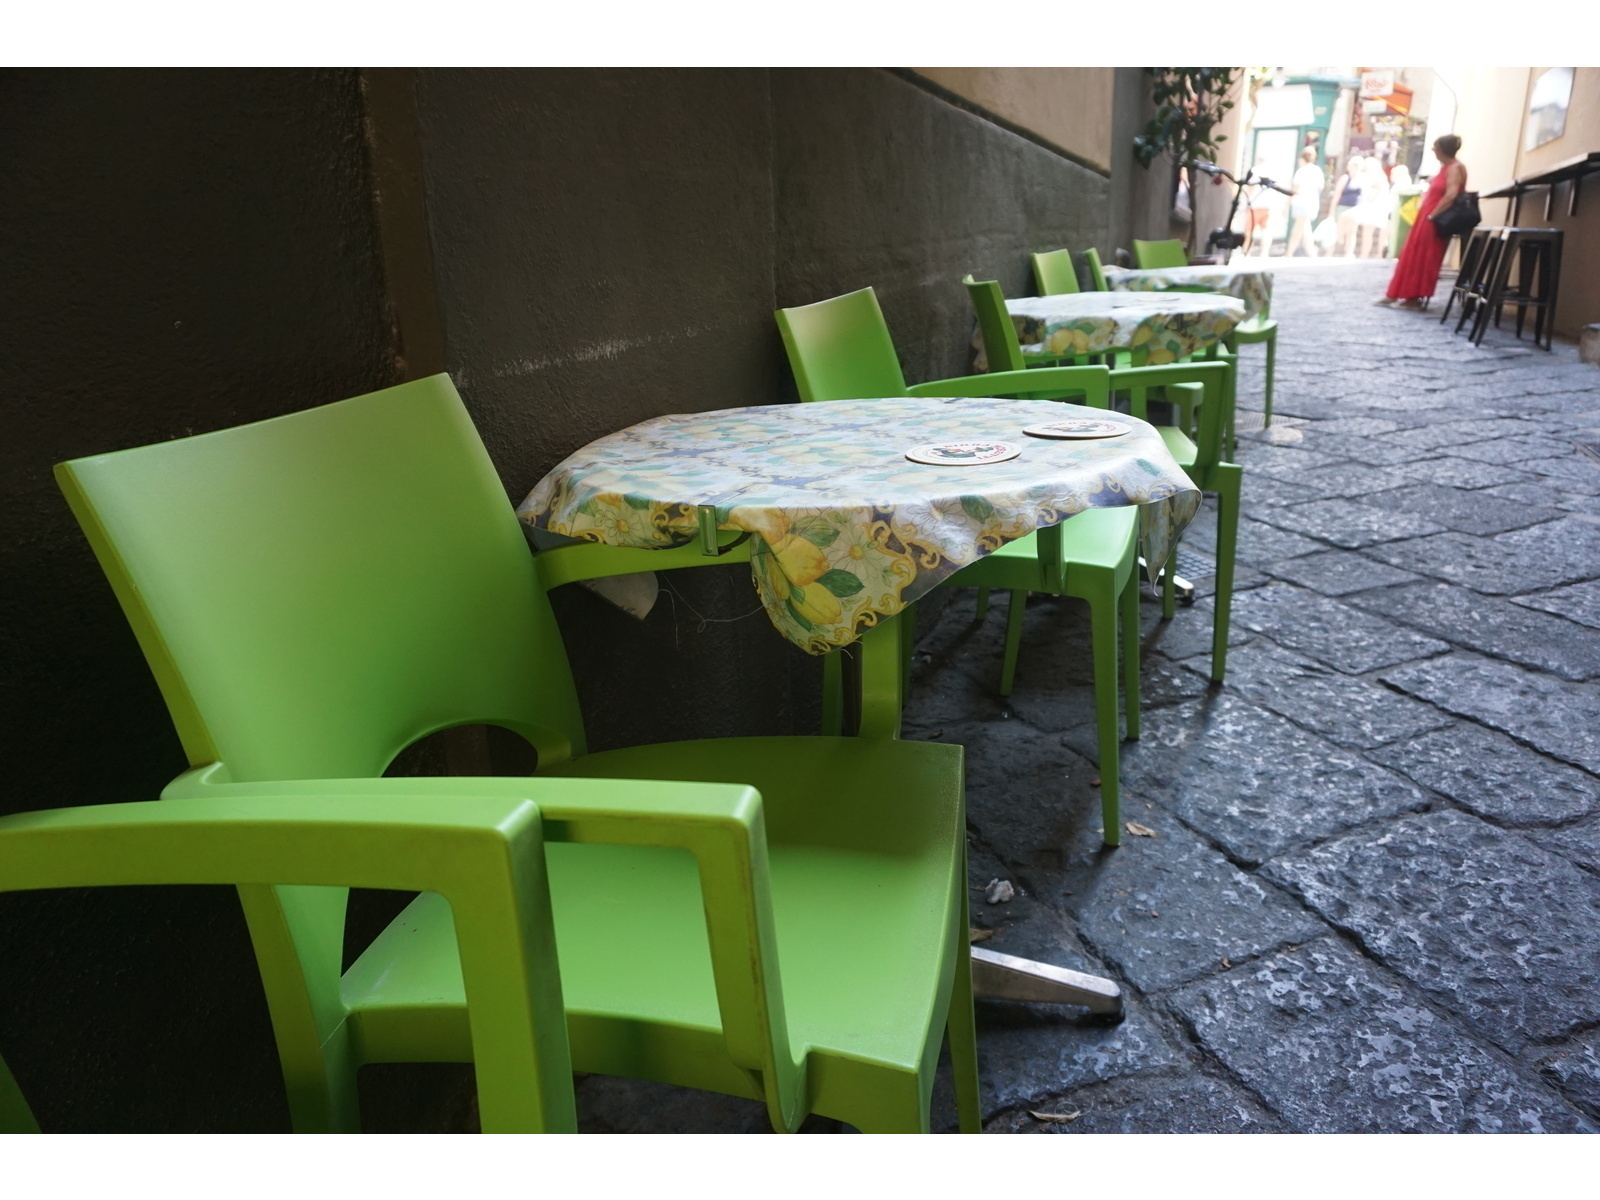 Chairs in Sorrento.jpg